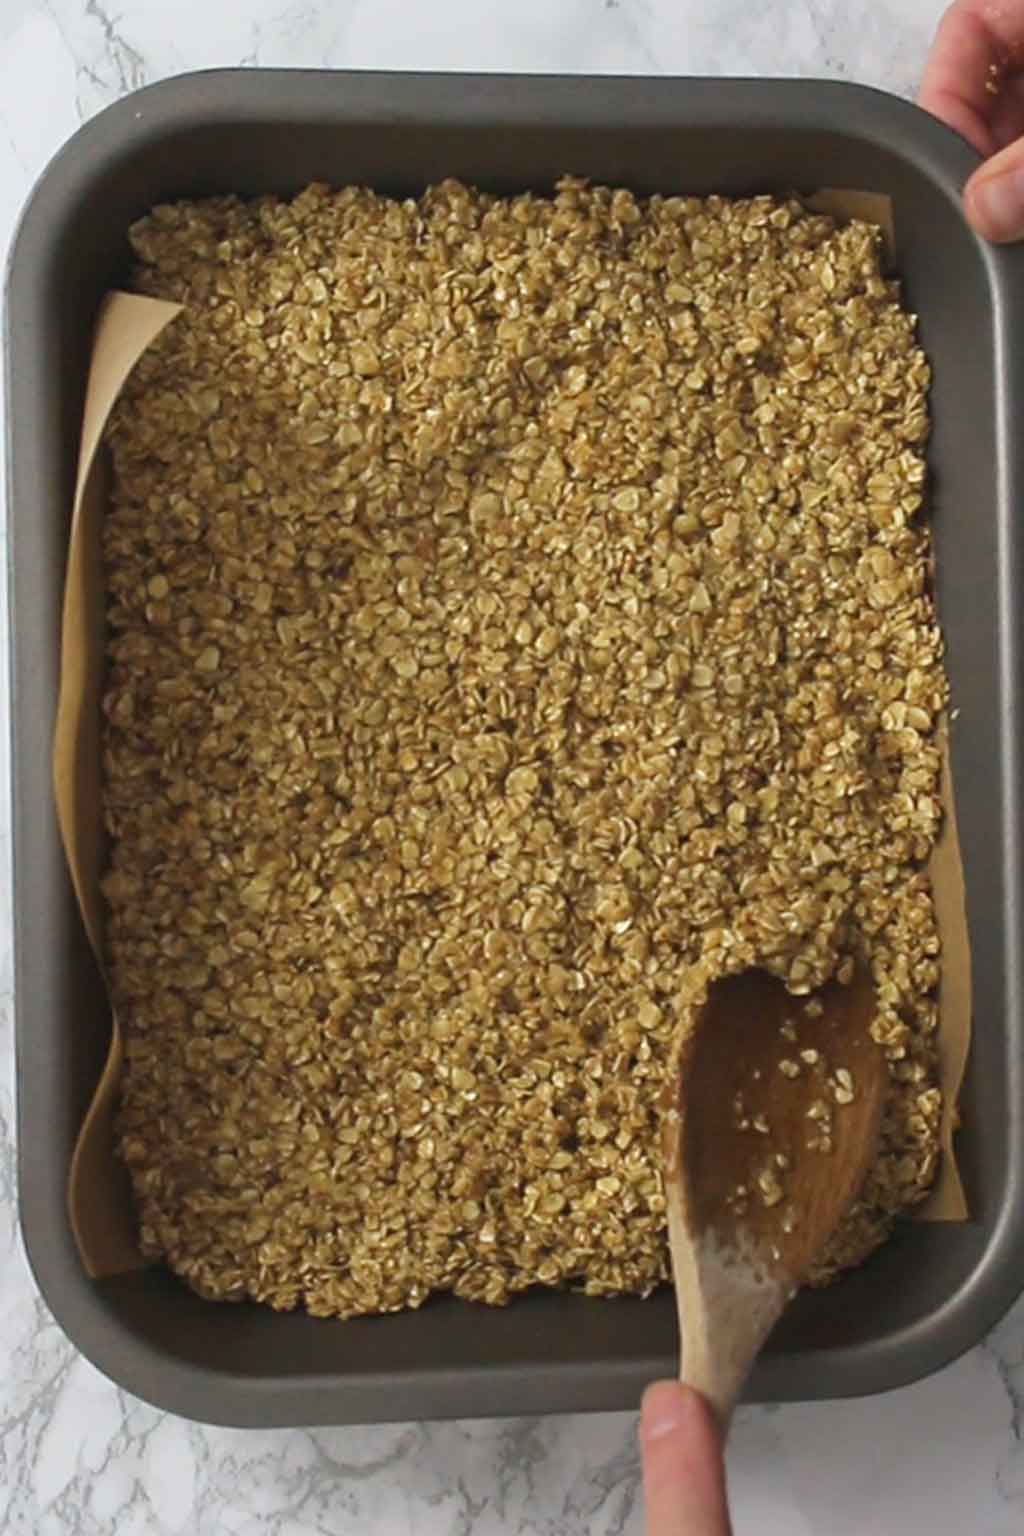 Packing flapjack mix into the tin